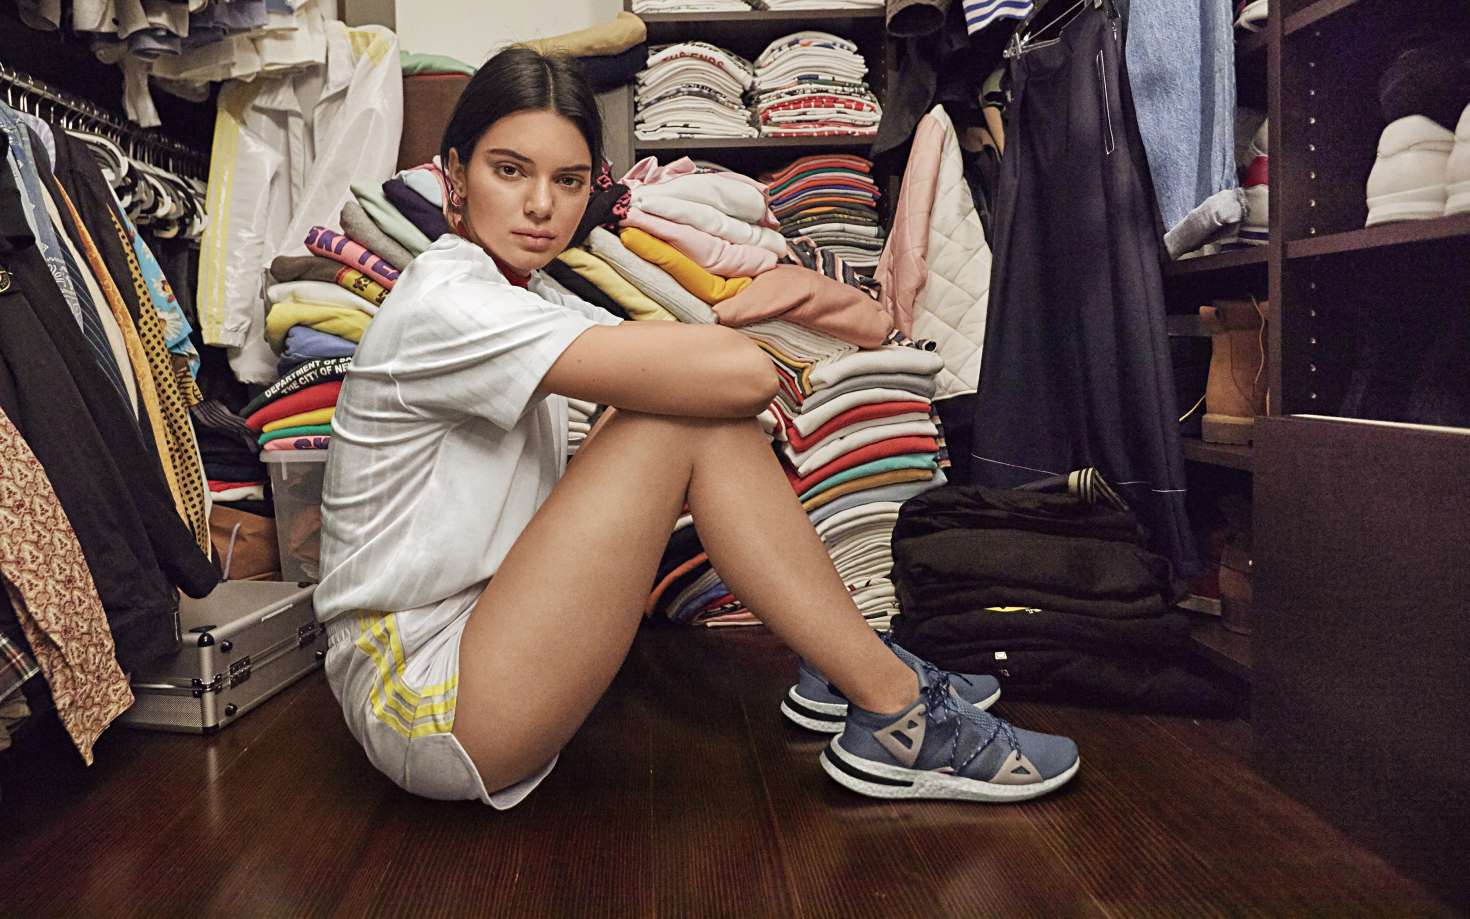 Kendall Jenner - Adidas Originals Promo for the new Arkyn 2018